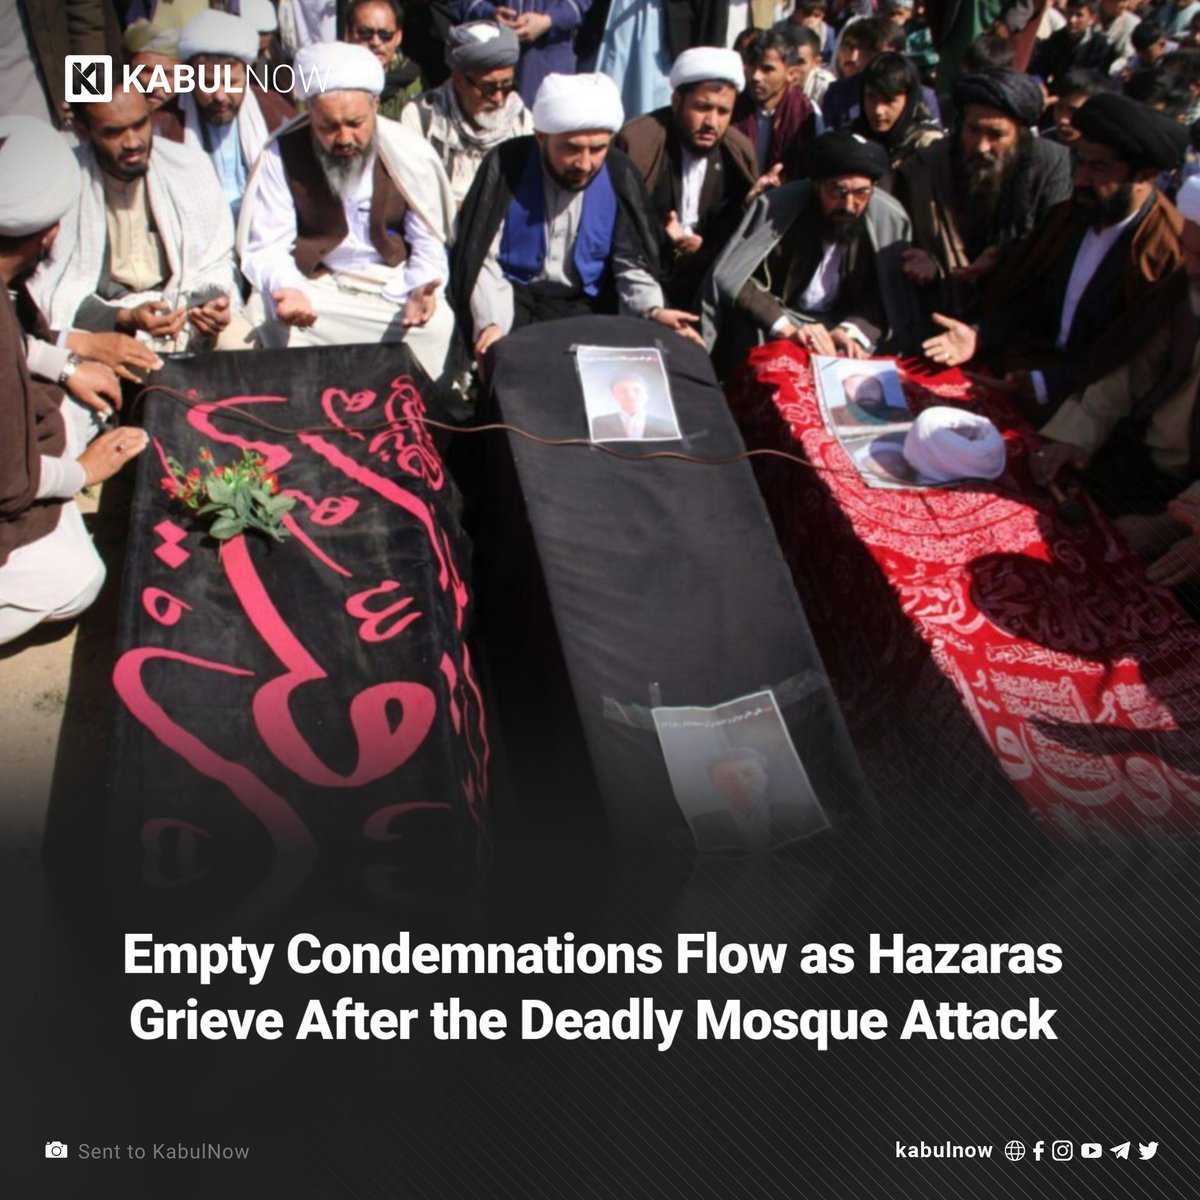 In the wake of a massacre in a Shia mosque, the United Nations Assistance Mission in Afghanistan (UNAMA) says that the country’s Hazara-Shia community needs immediate protection measures. Read more here: kabulnow.com/?p=35514